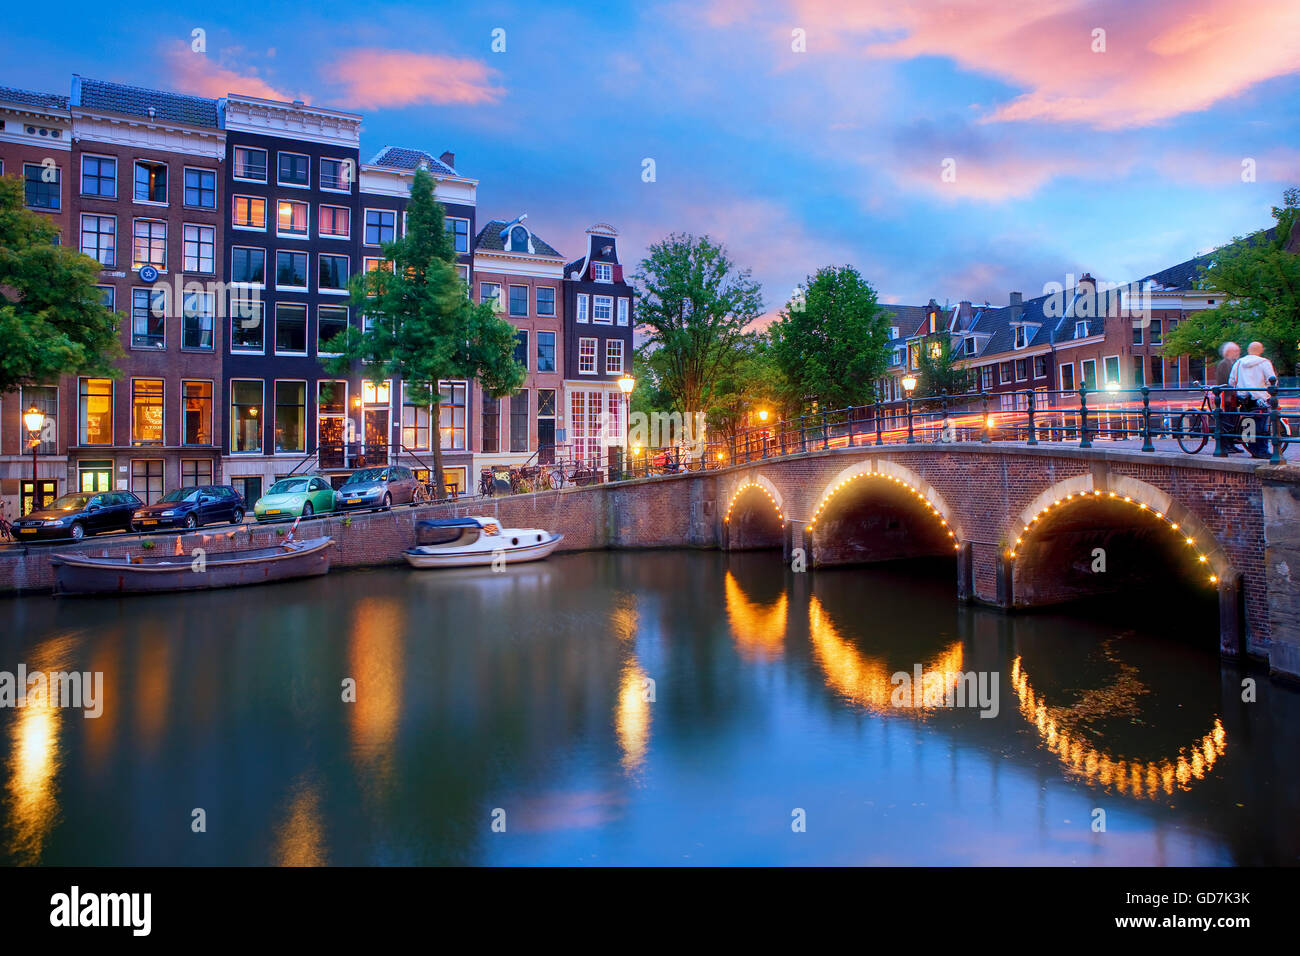 Keizersgracht canal at night in Amsterdam Stock Photo